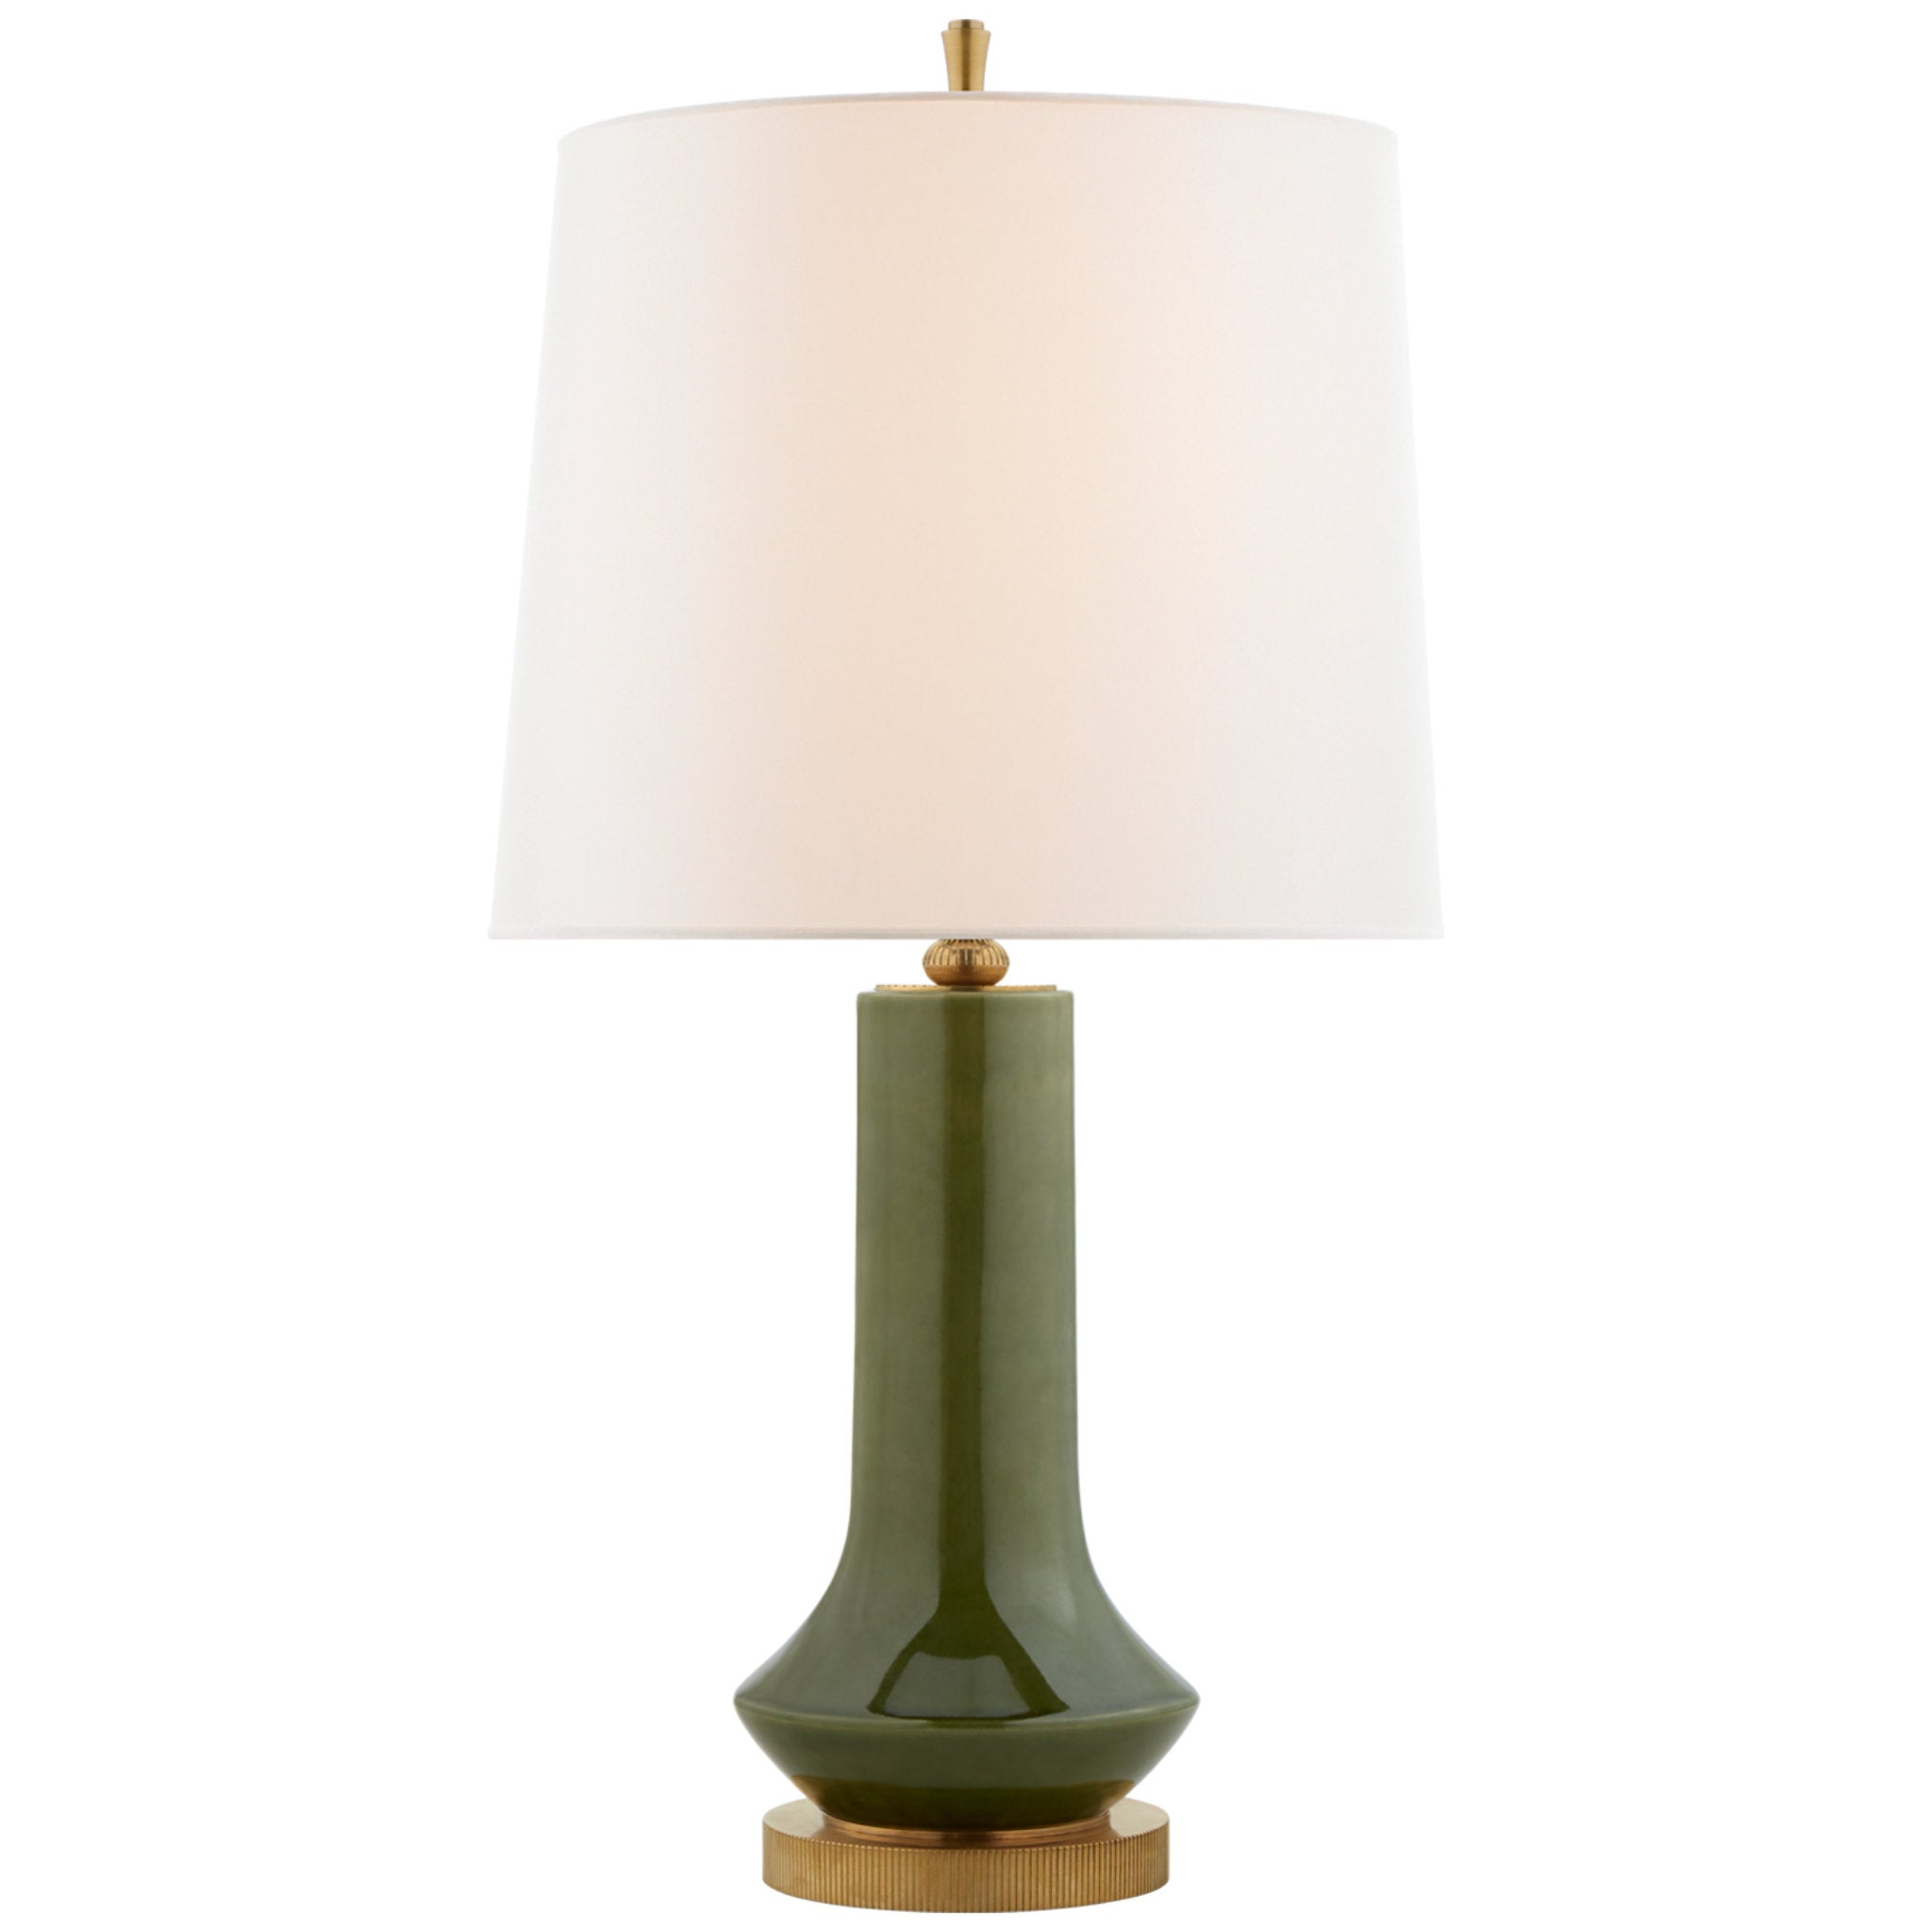 Thomas O'Brien Luisa Large Table Lamp in Emerald Green with Linen Shade